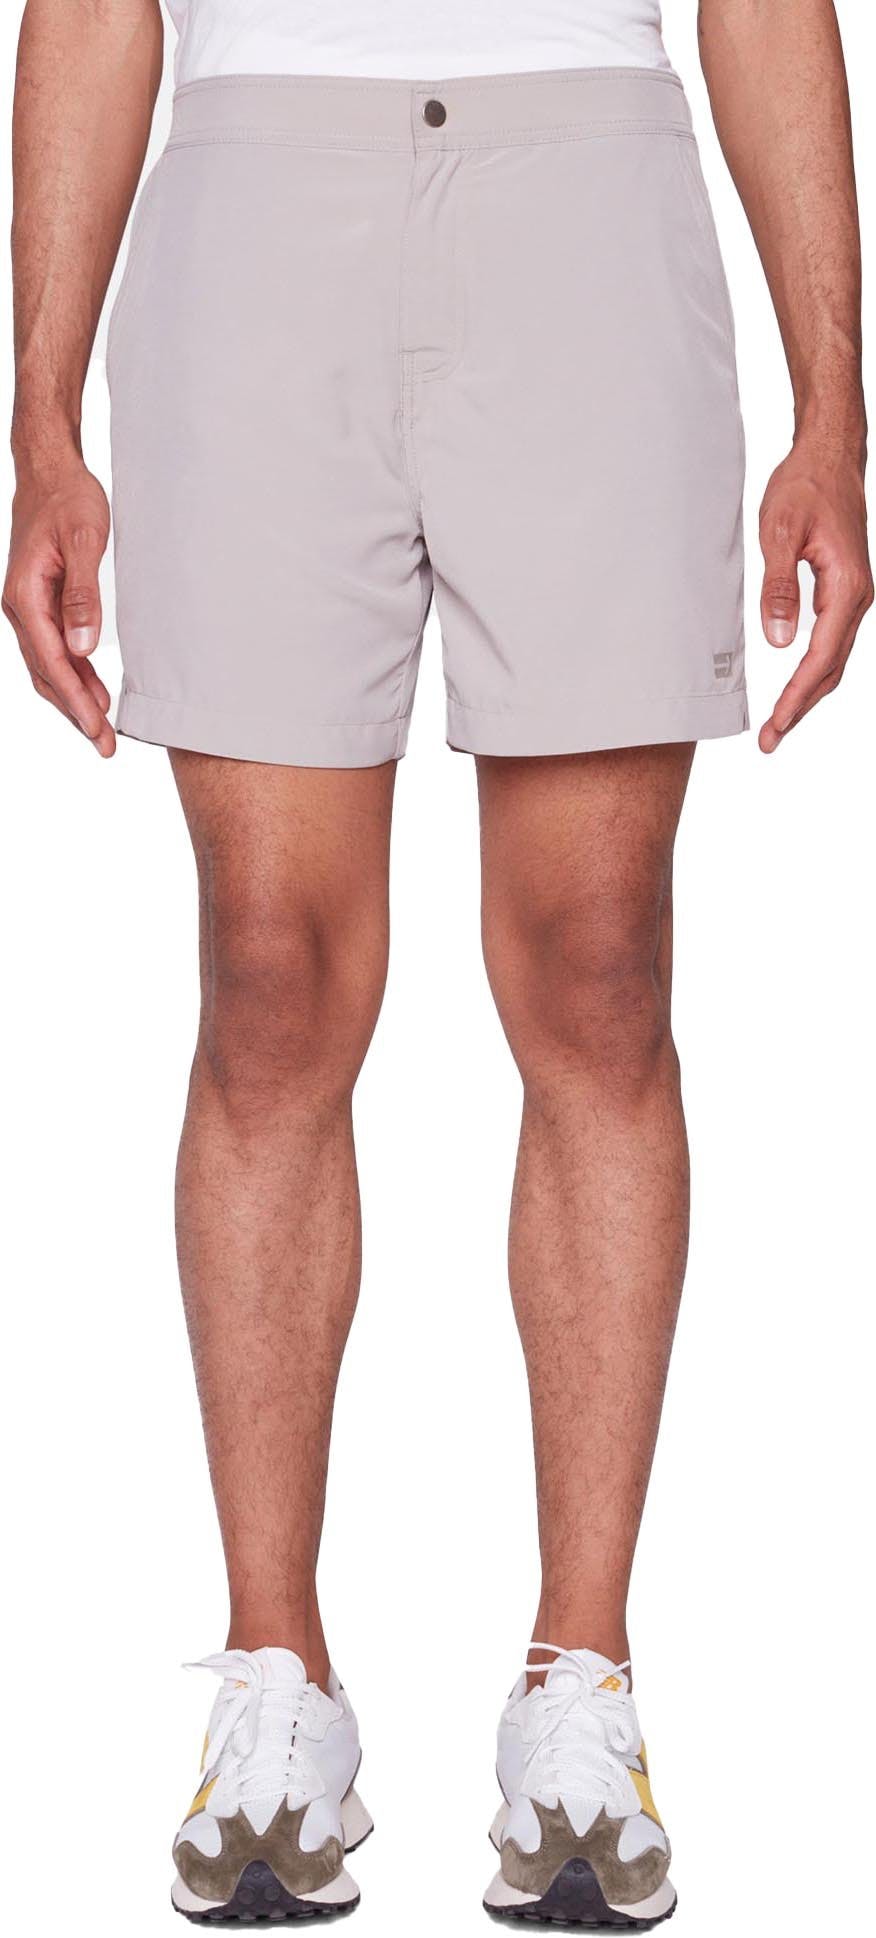 Product image for 4-Way Stretch Running Short - Men's